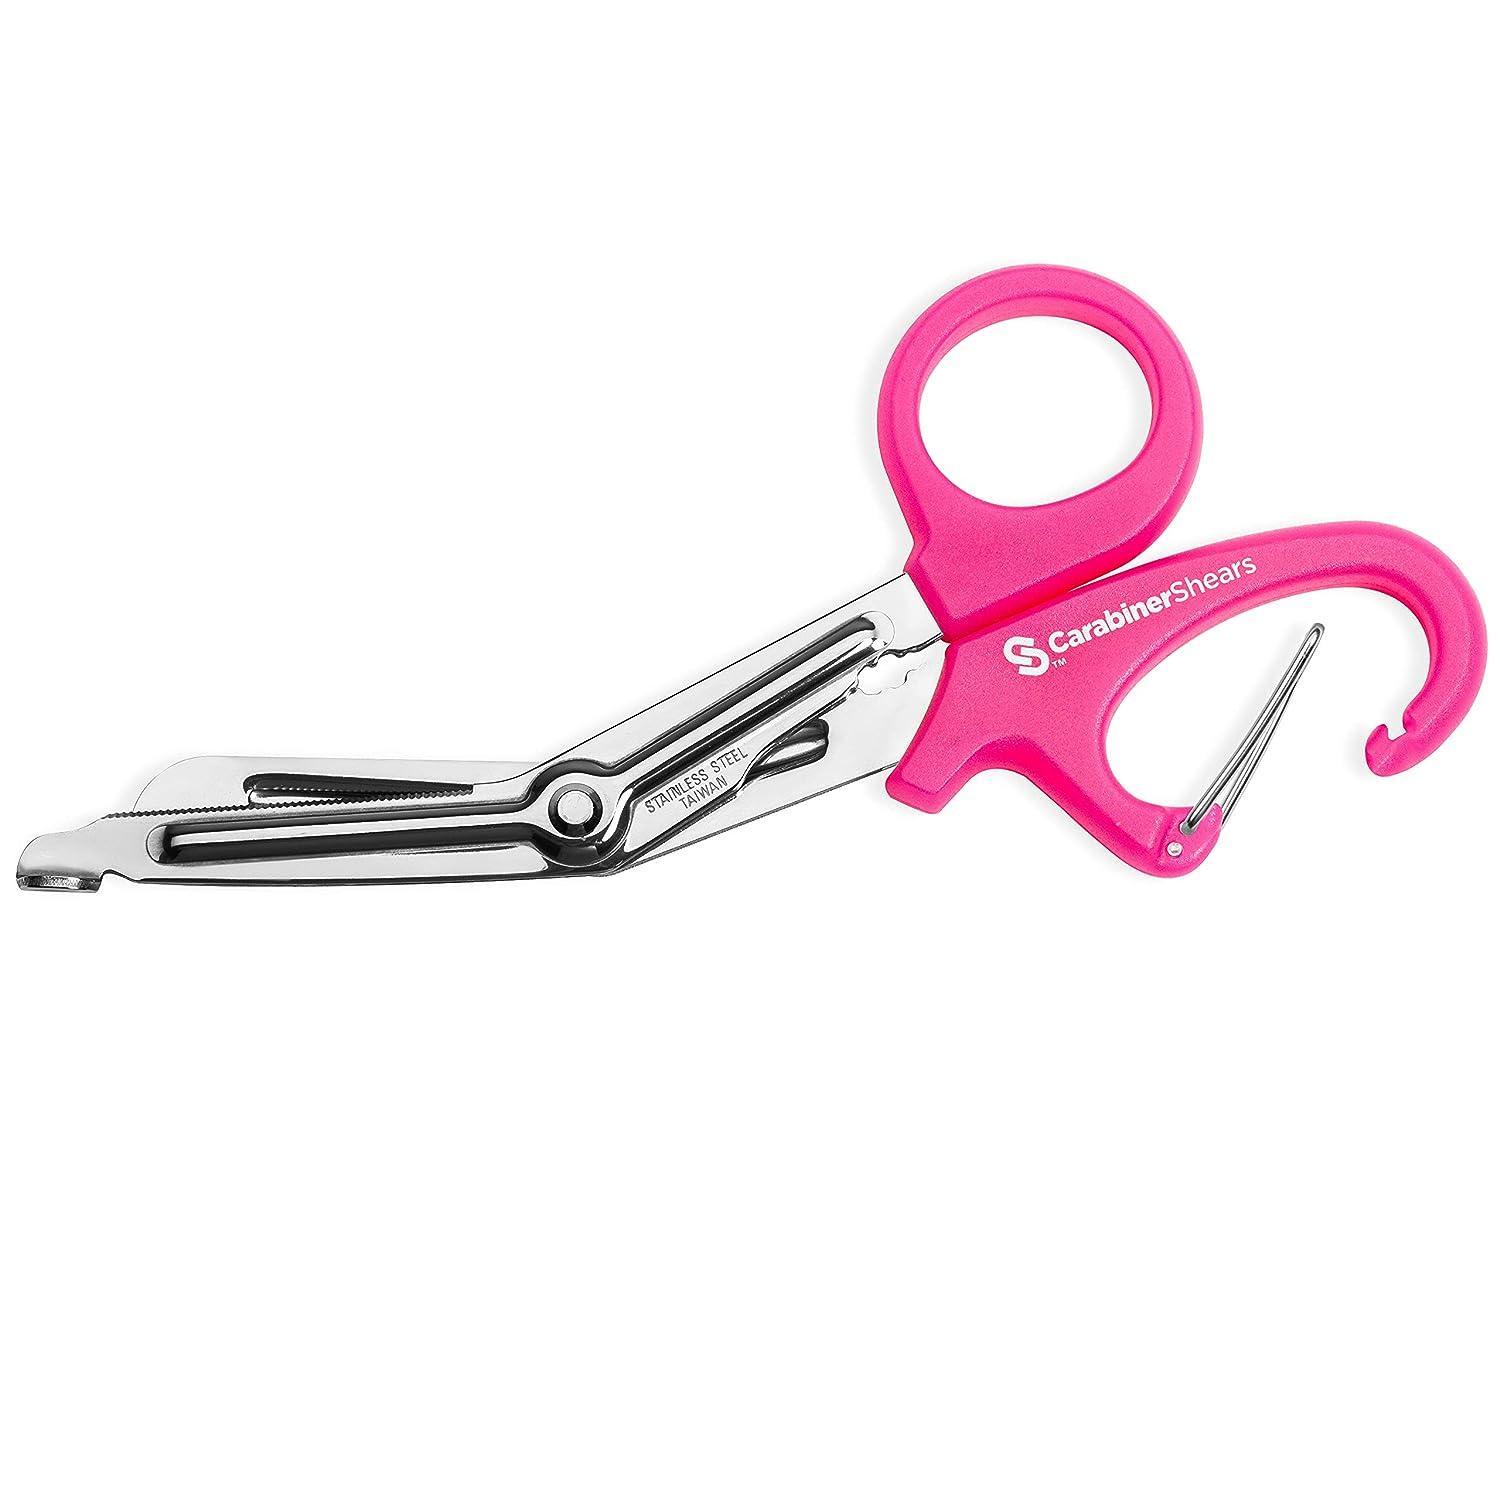 Live, Love, Heal Bandage/Utility Scissors with Carabiner